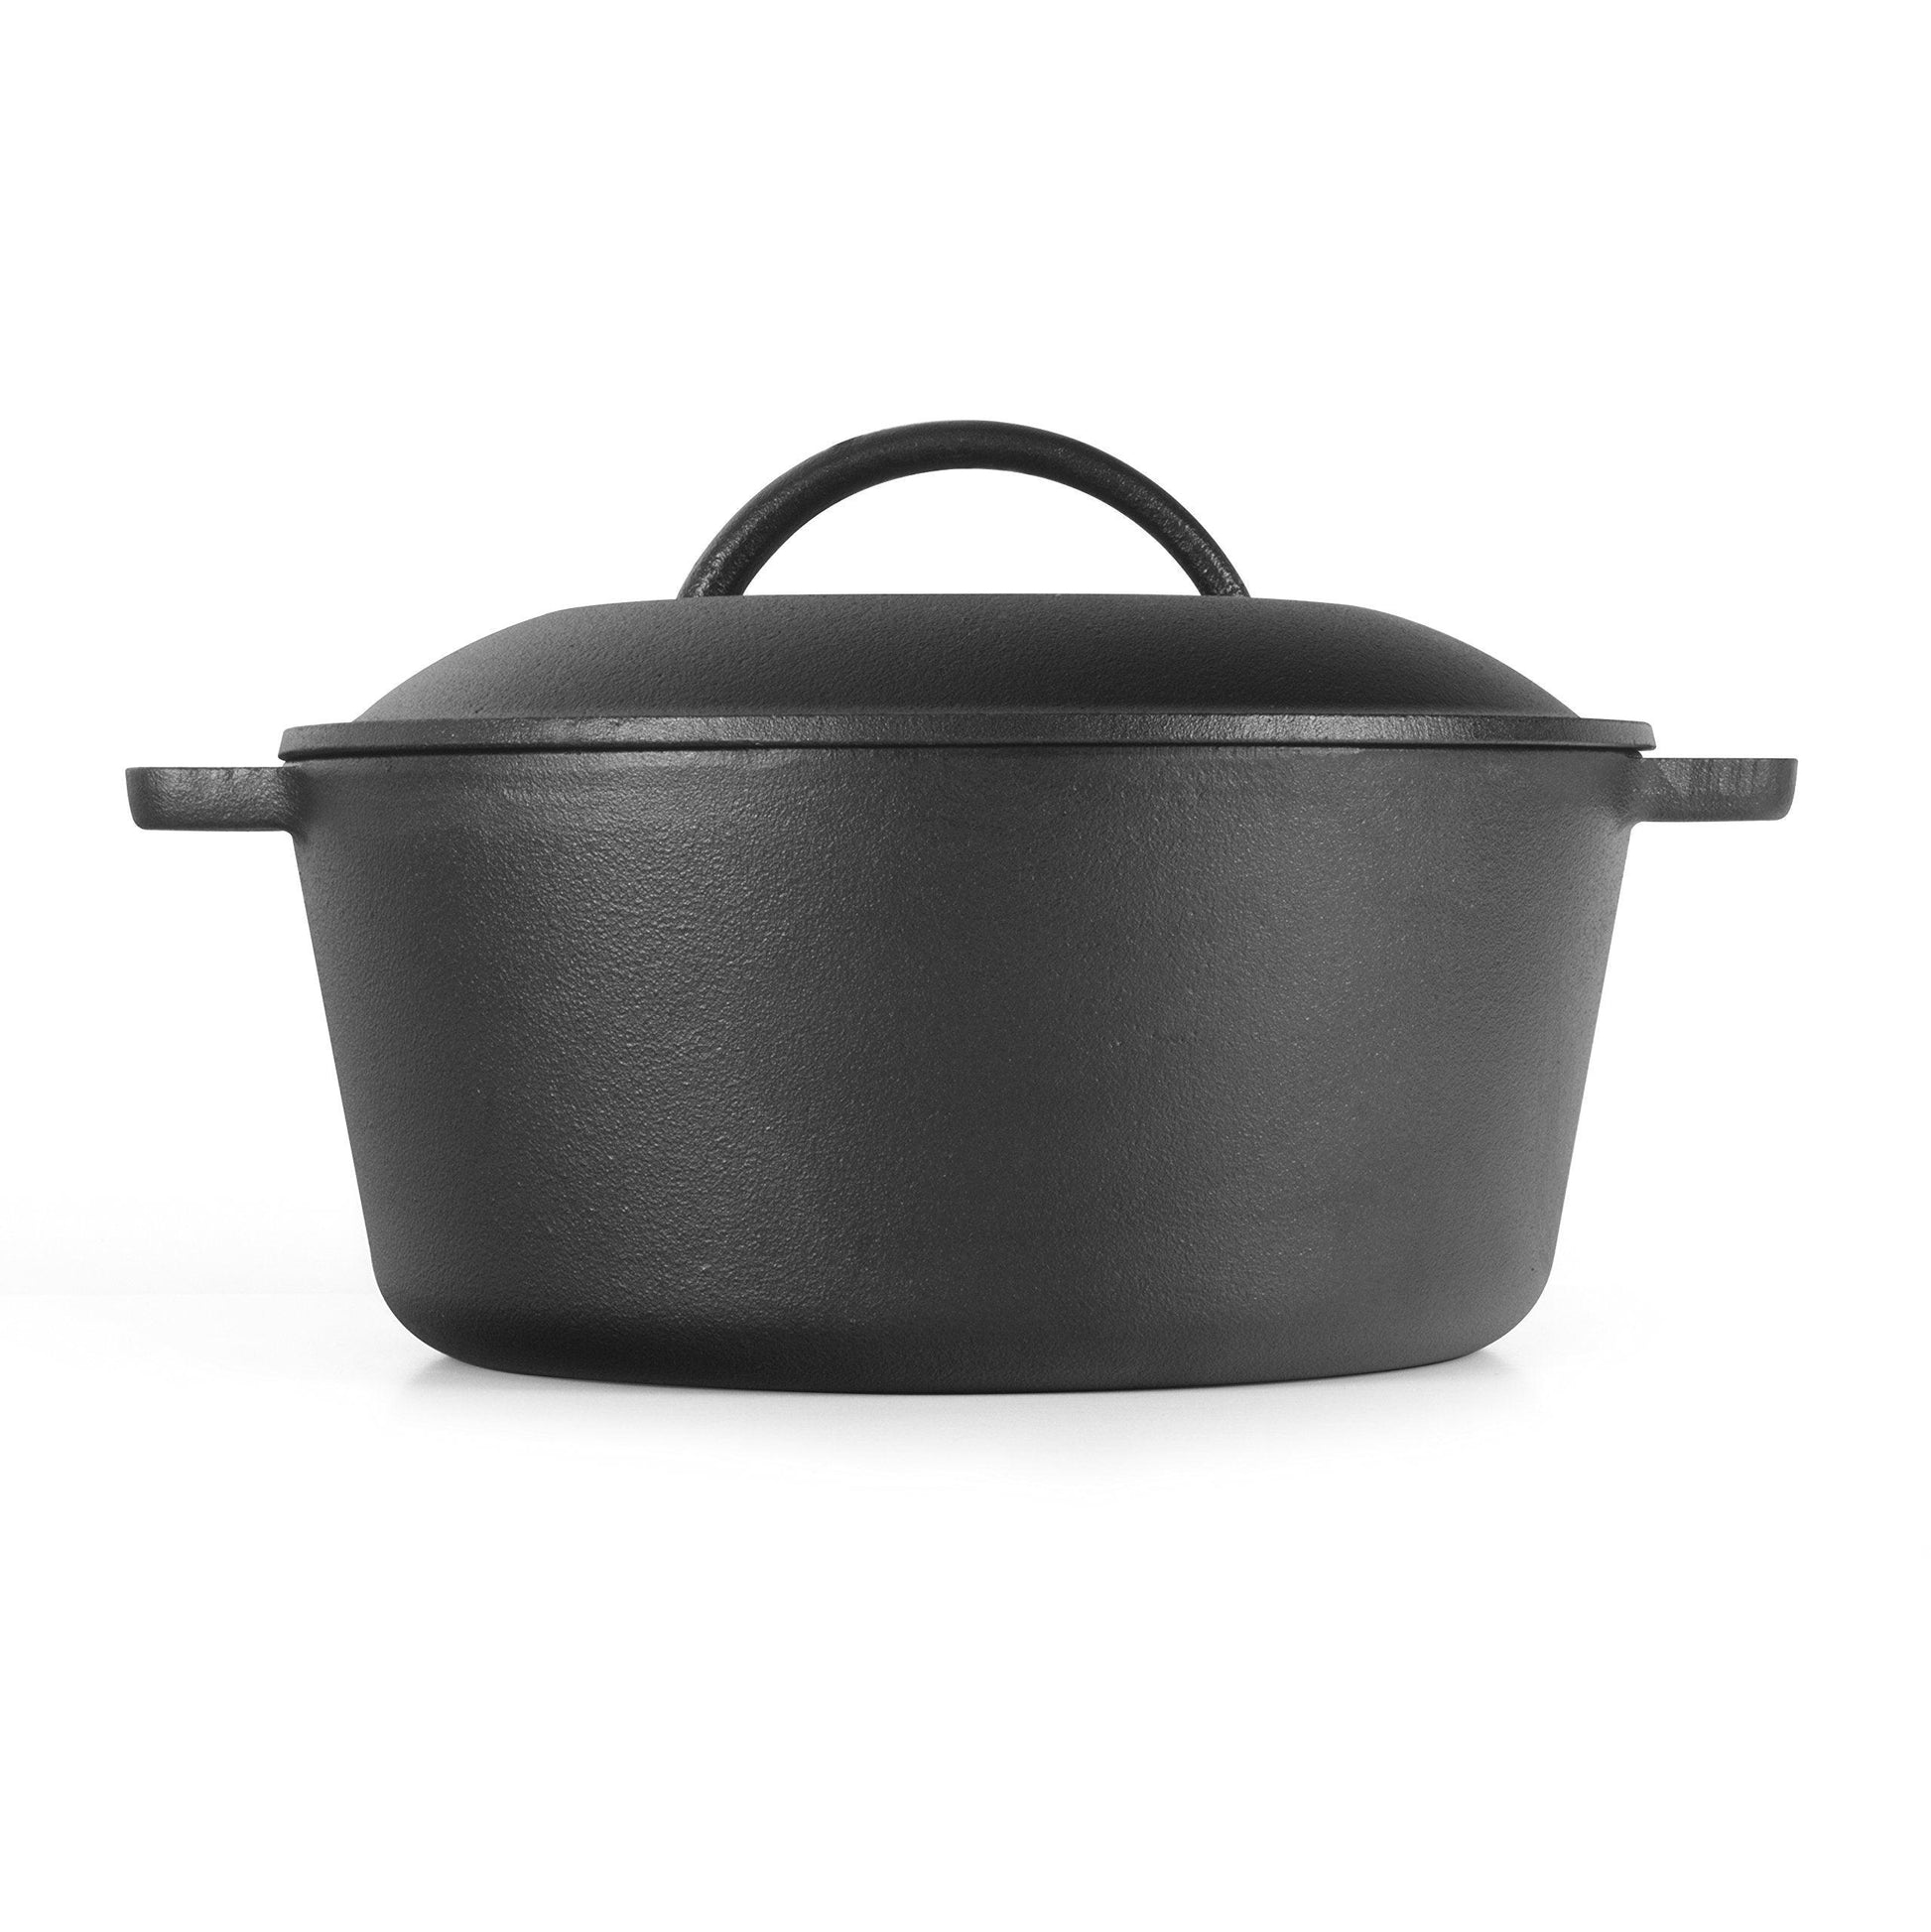 COMMERCIAL CHEF 5 Quart Cast Iron Dutch Oven with Dome Lid & Handles, Preseasoned - CookCave